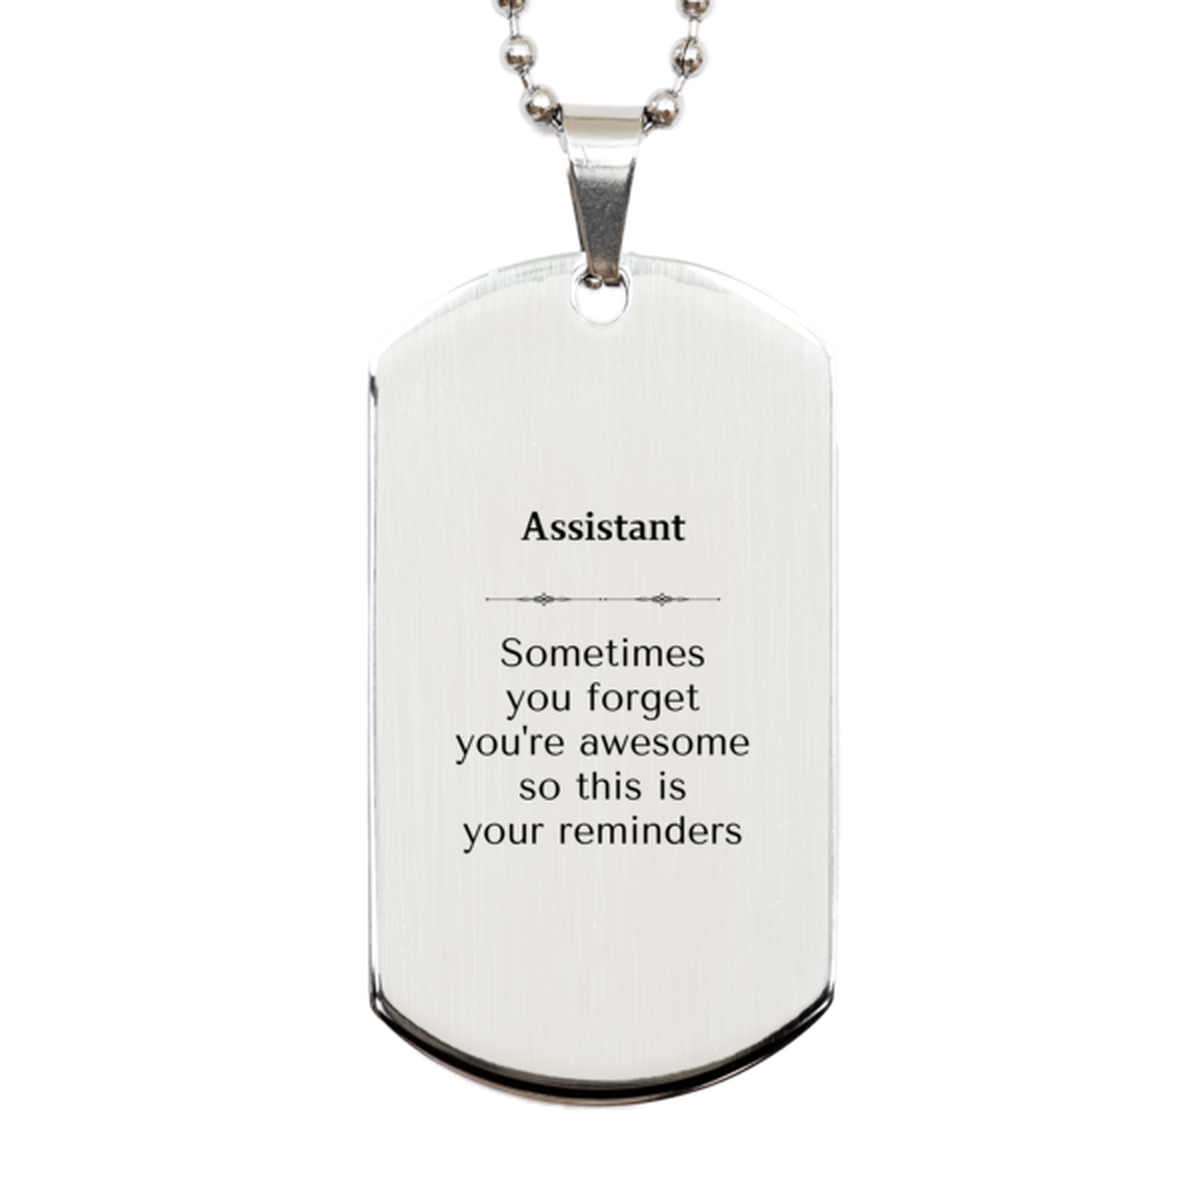 Sentimental Assistant Silver Dog Tag, Assistant Sometimes you forget you're awesome so this is your reminders, Graduation Christmas Birthday Gifts for Assistant, Men, Women, Coworkers